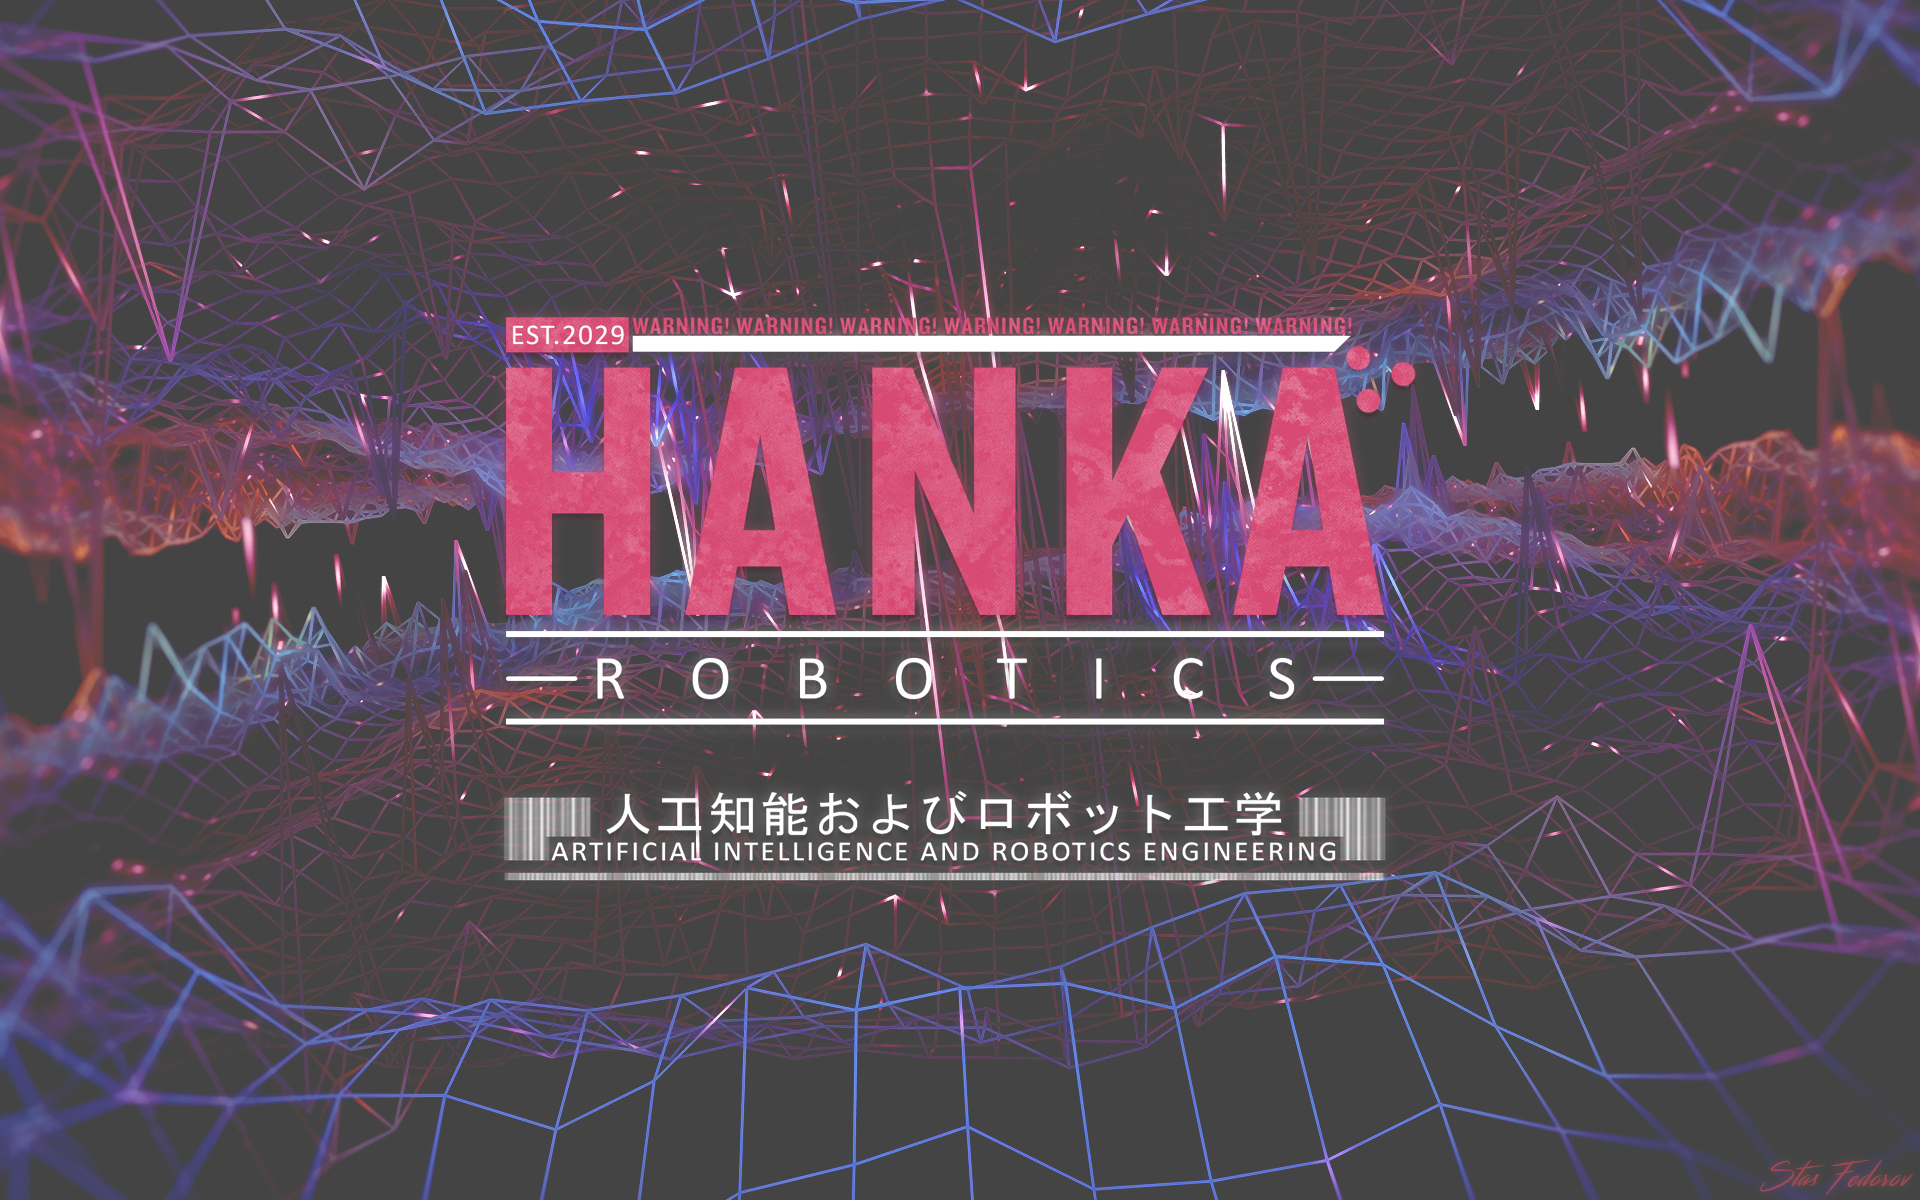 General 1920x1200 anime Ghost in the Shell photoshopped neon typography illustration Hanka logo text digital art